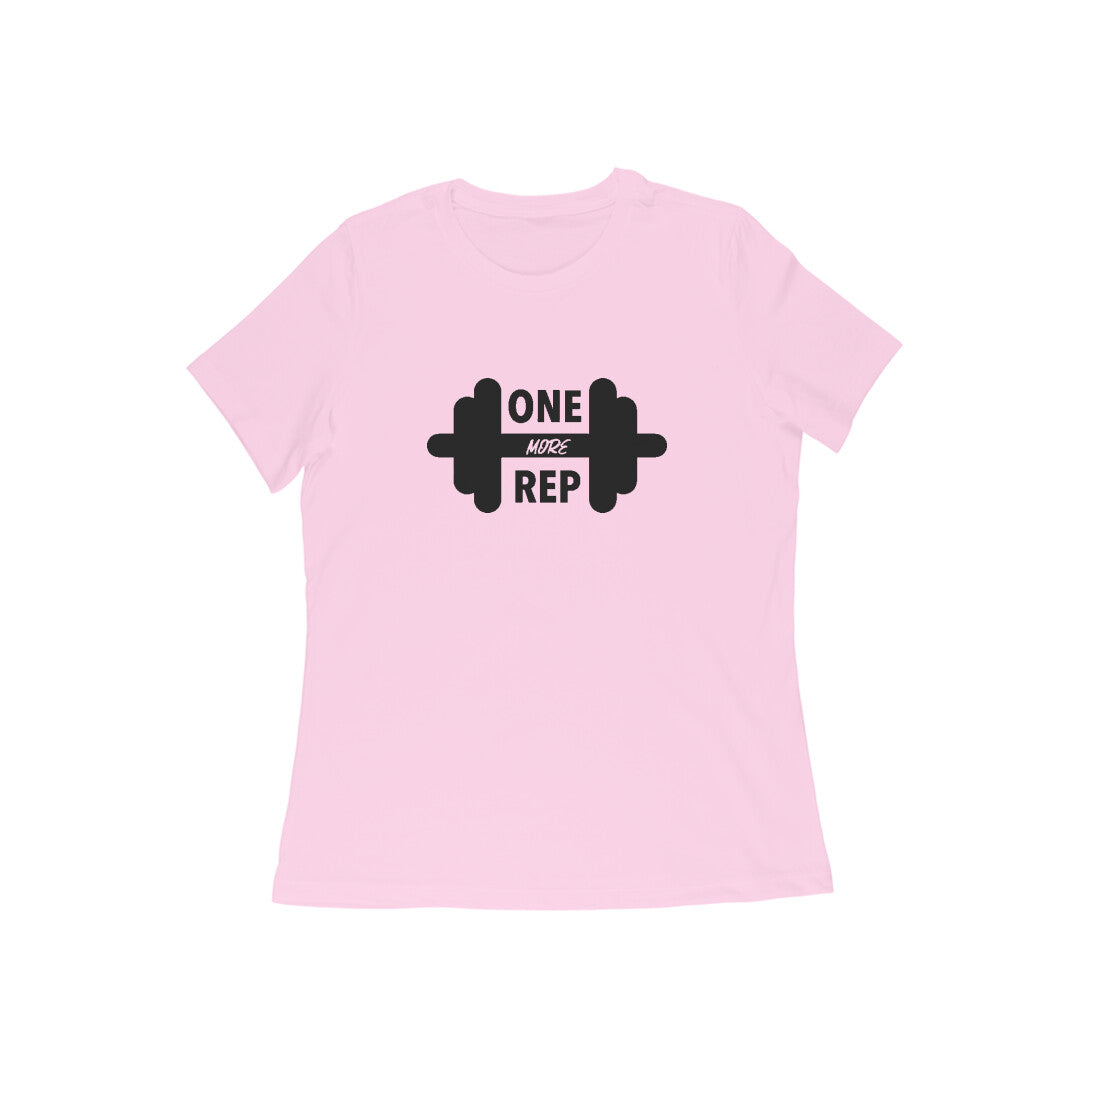 One More Rep! Workout T-shirt